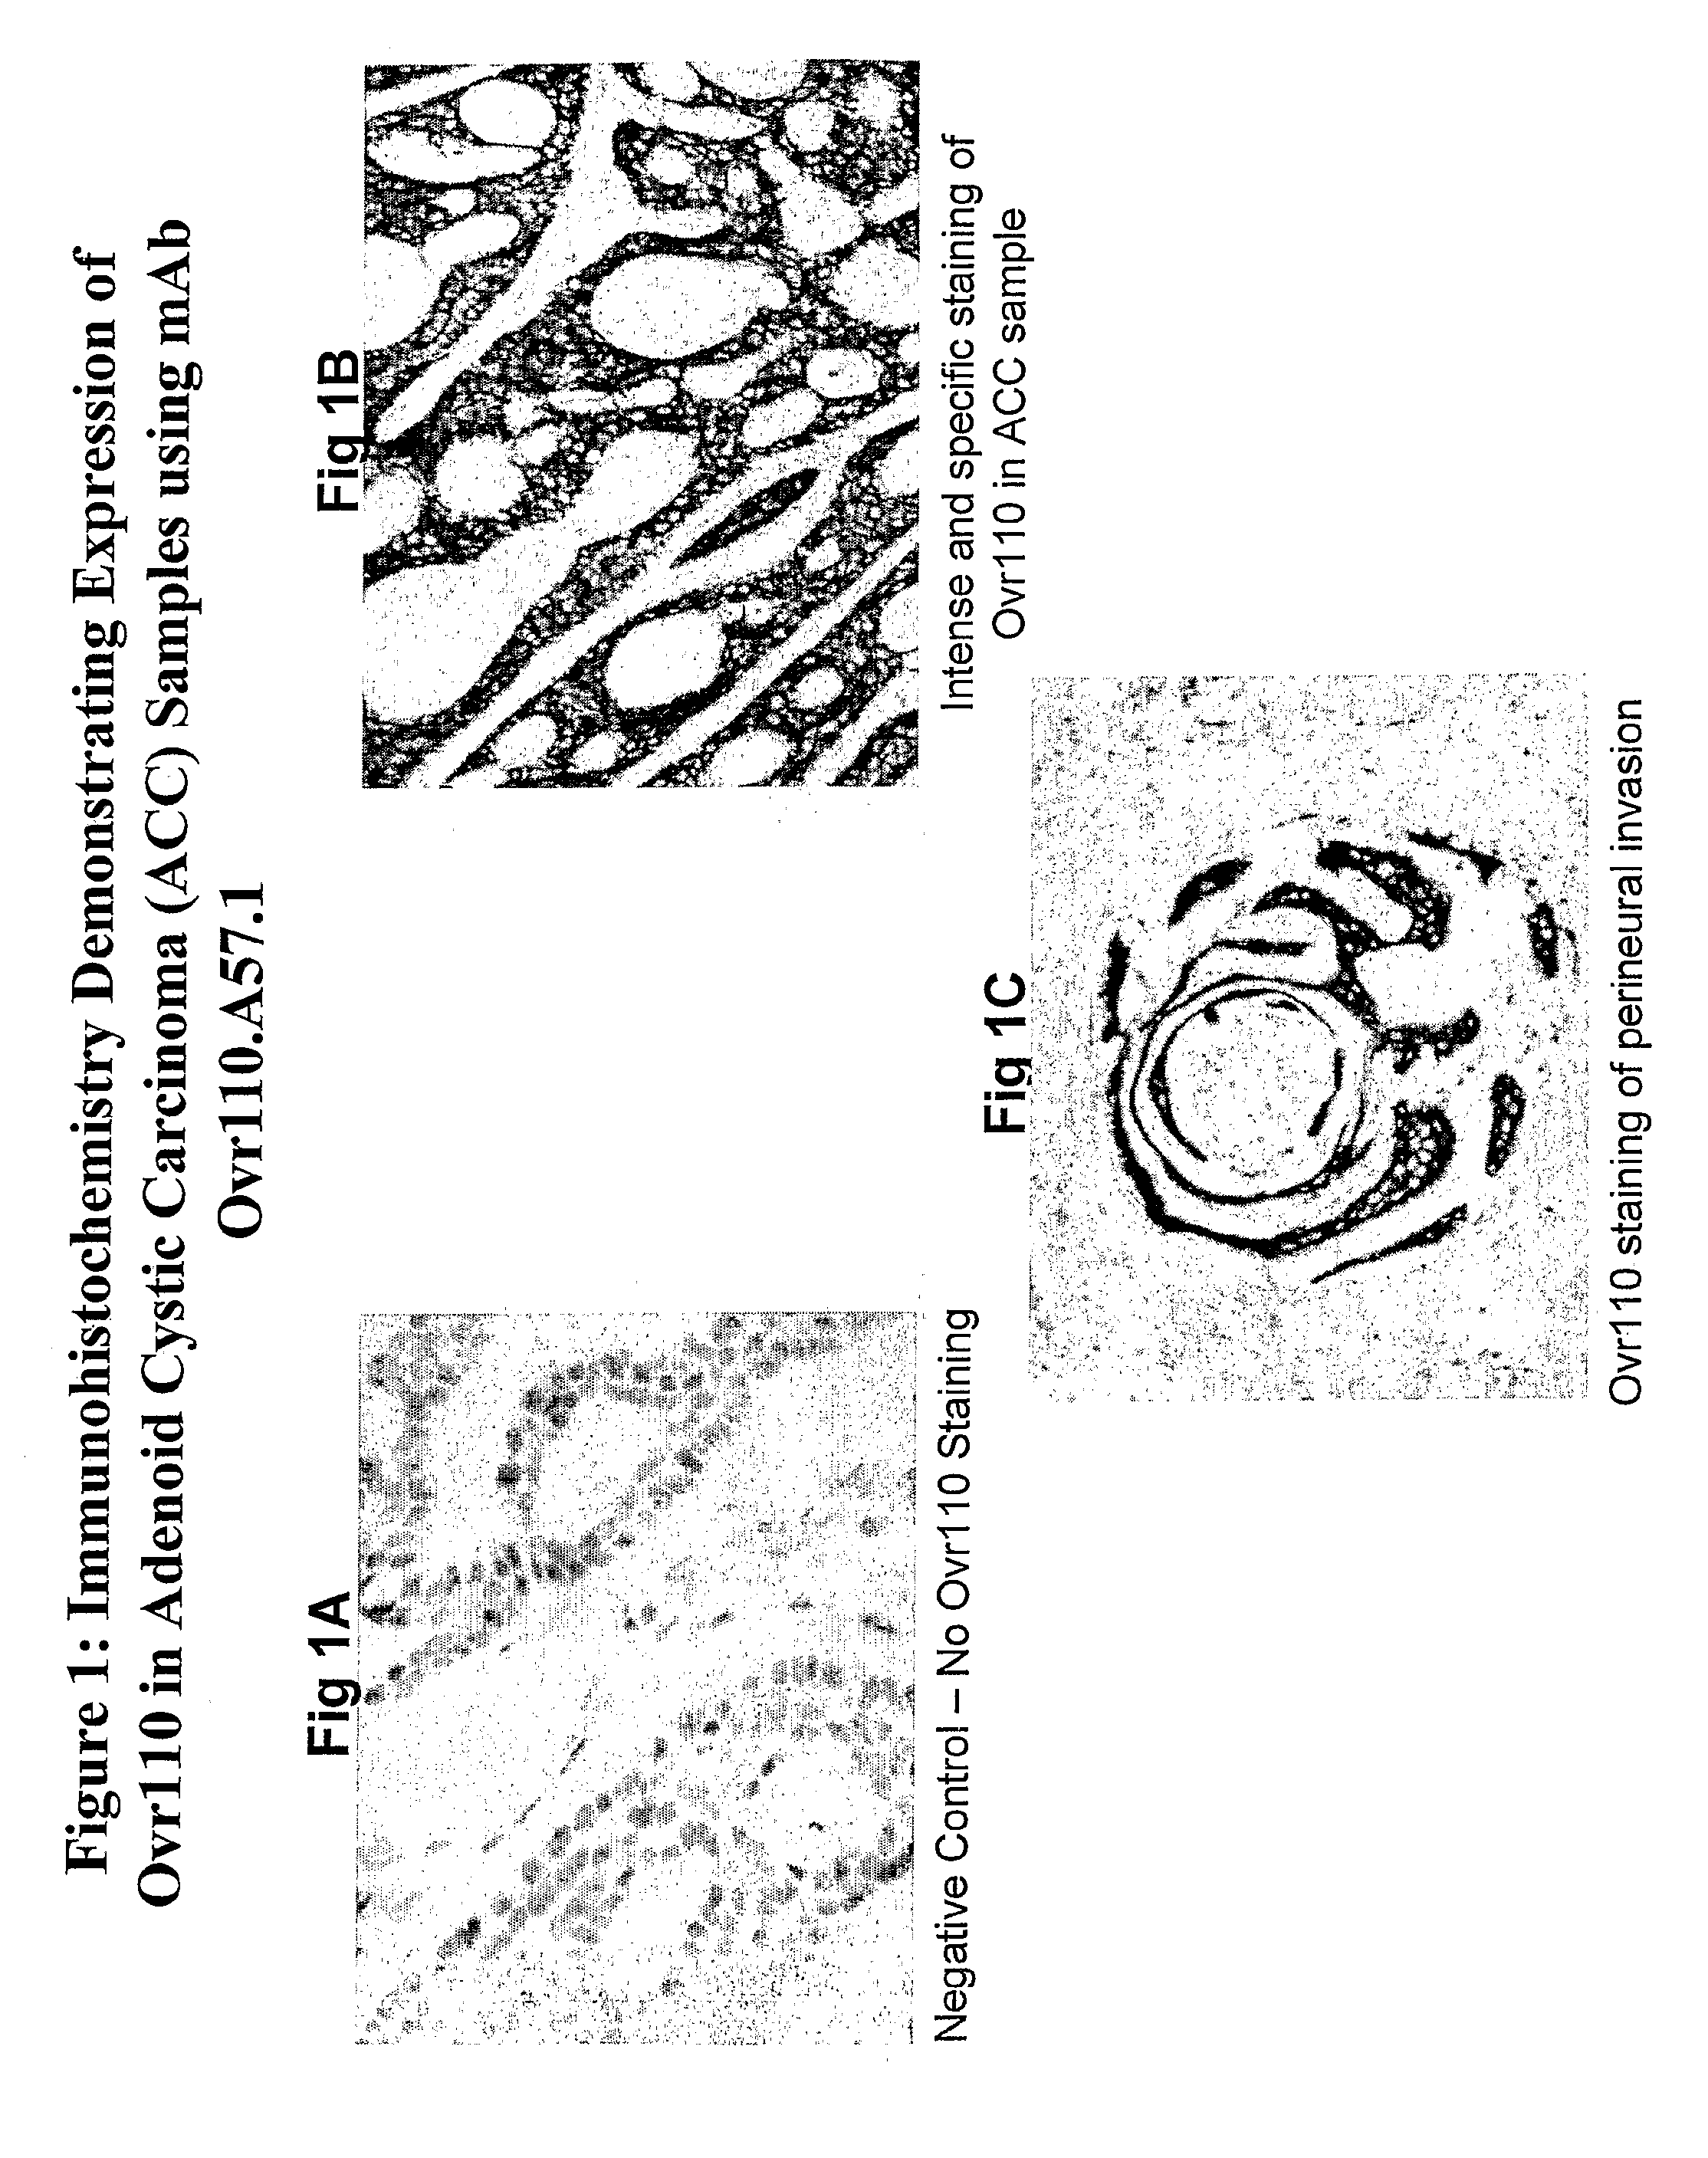 Ovr 110 Antibody Compositions and Methods of Use